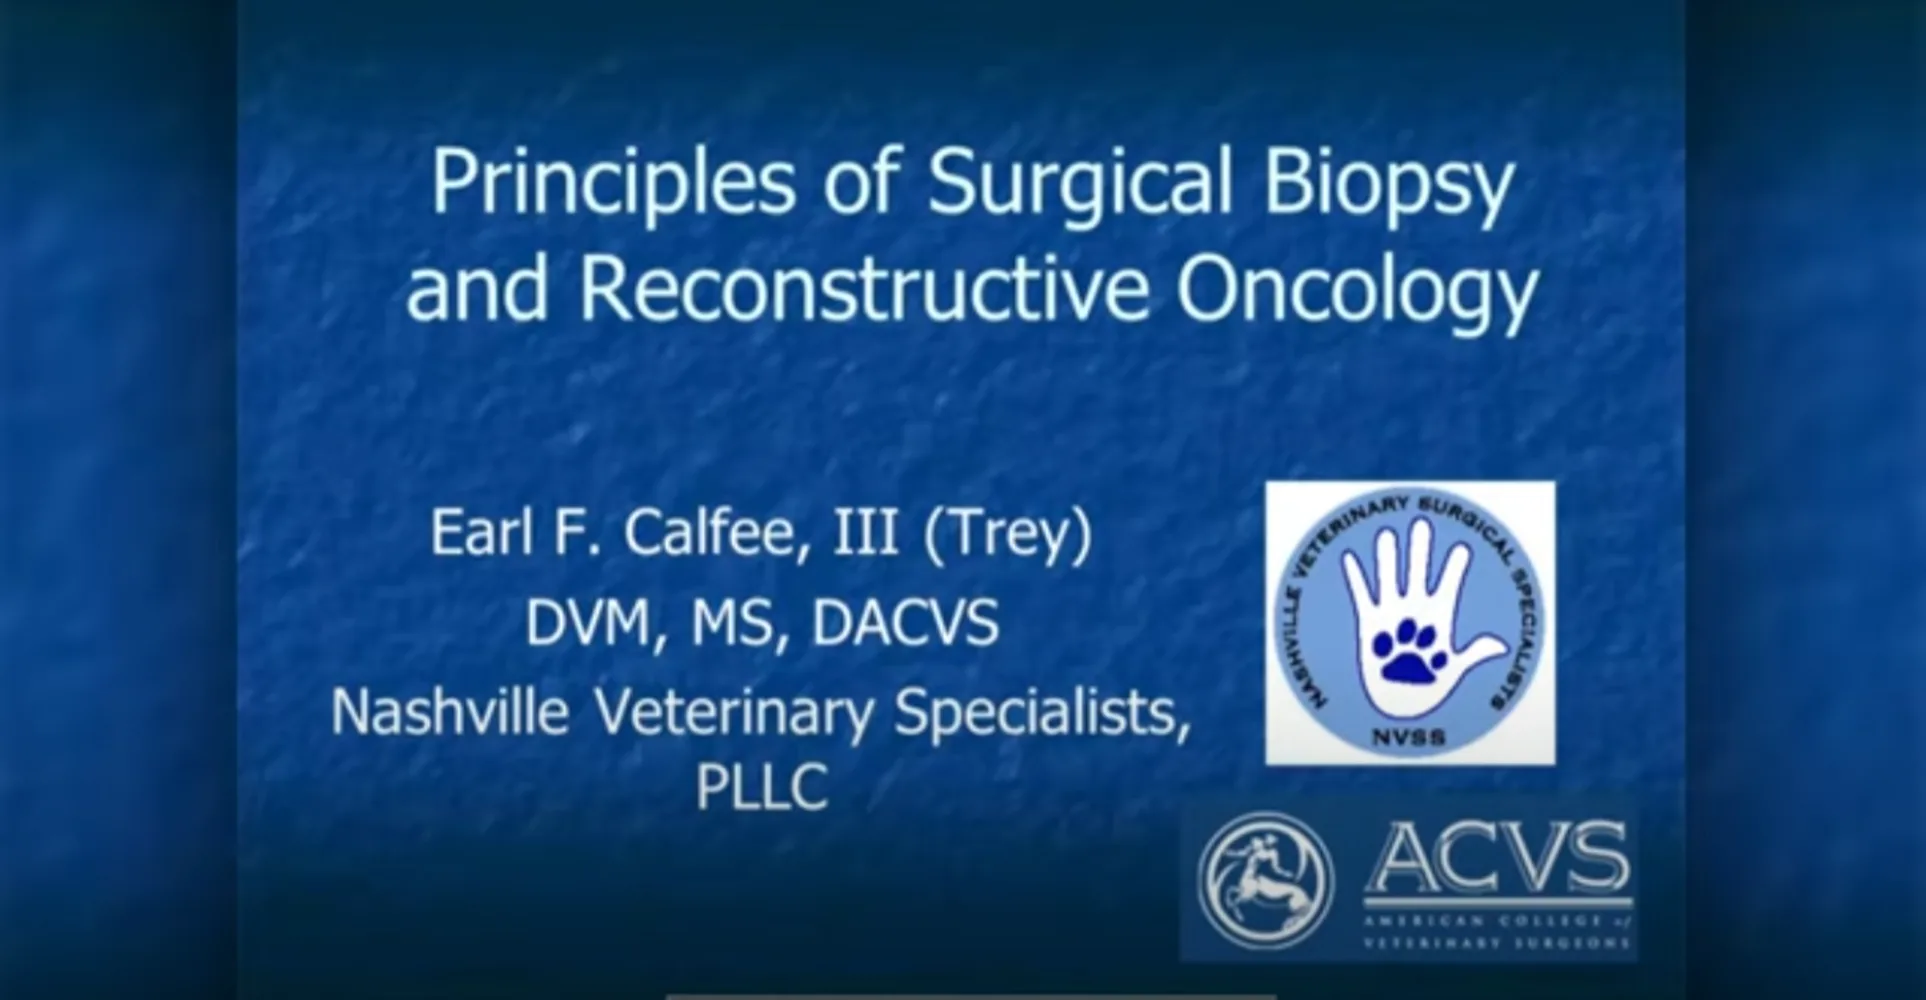 Principles of Surgical Biopsy Video at NVS